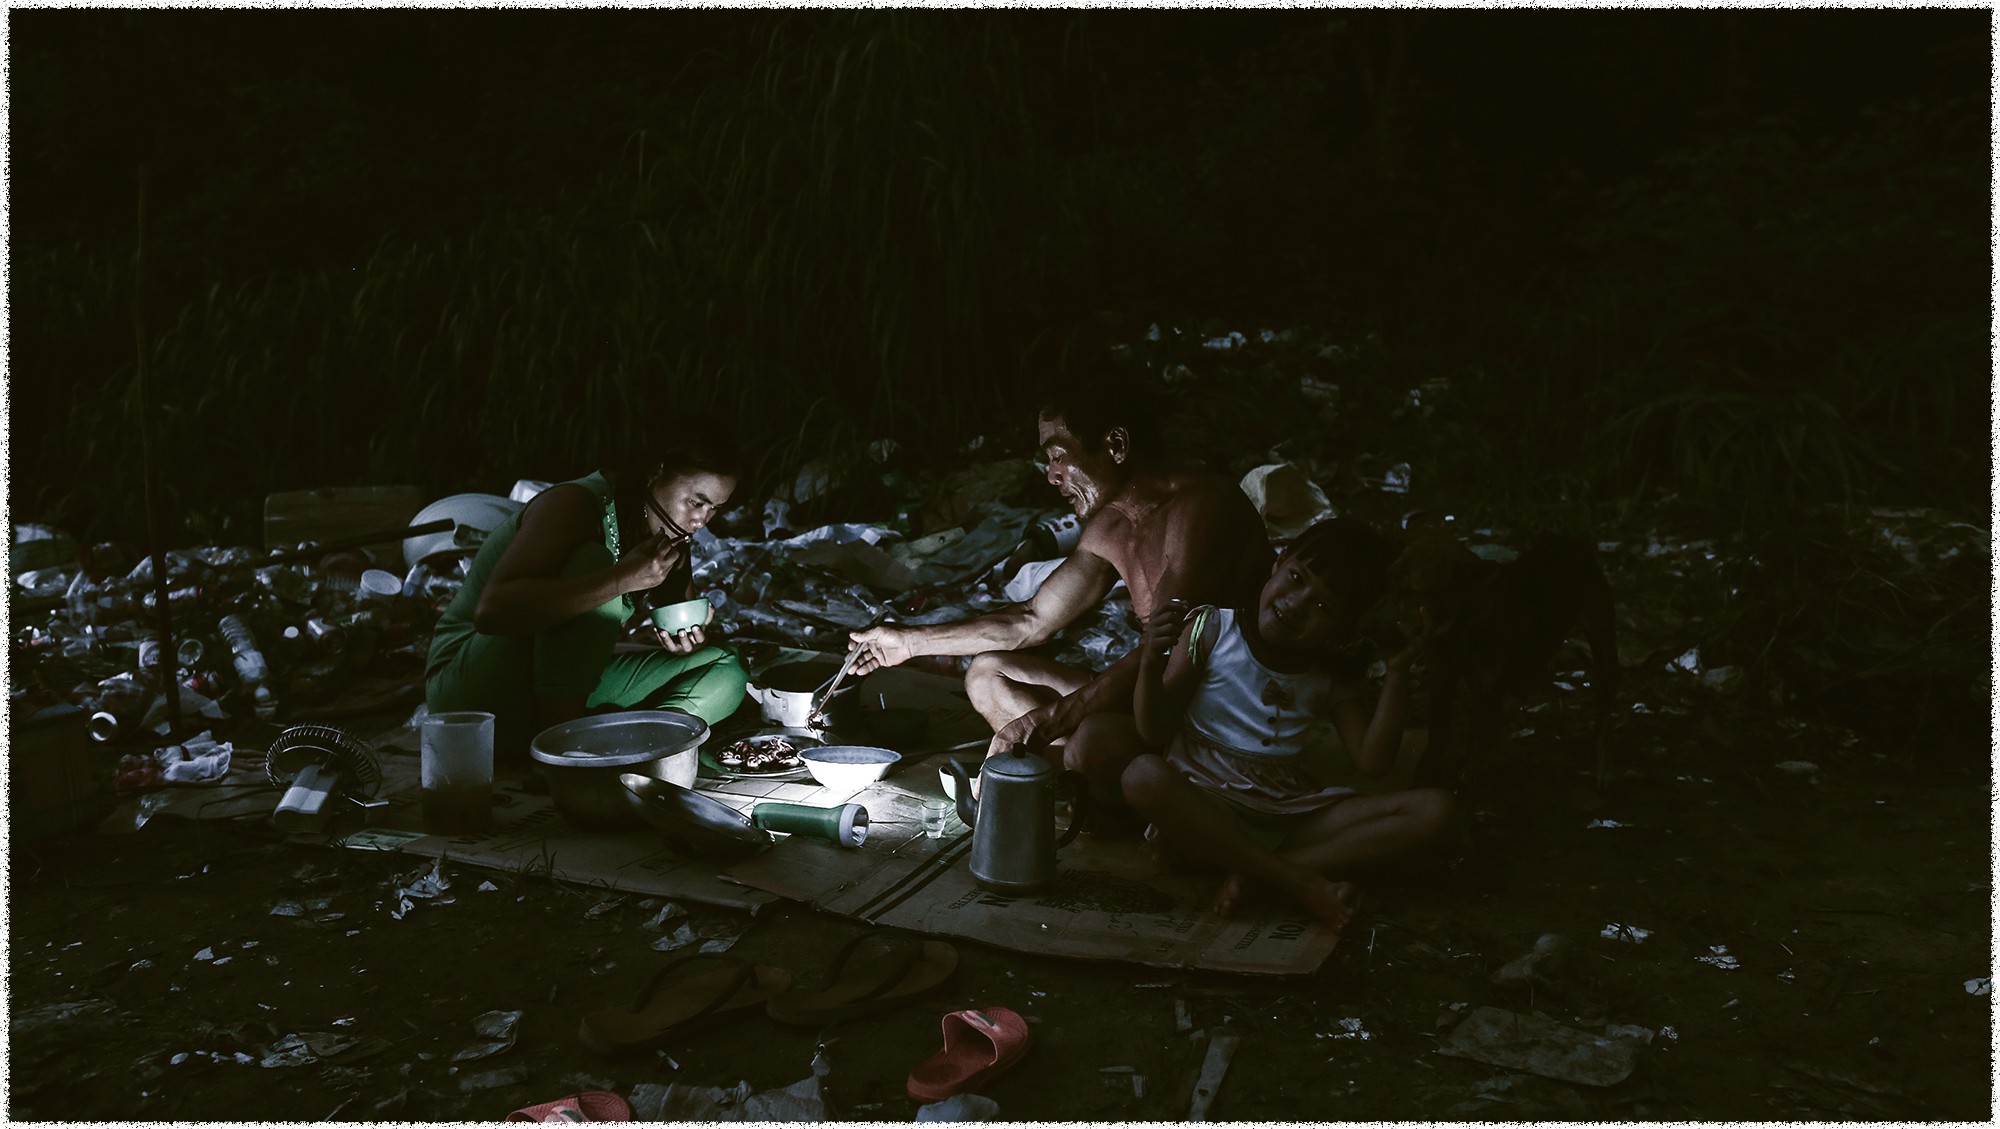 More than 20 Vietnamese Khmer families from the Mekong Delta are dwelling around trash dumps on Phu Quoc Island, off southern Vietnam. Photo: Tuoi Tre